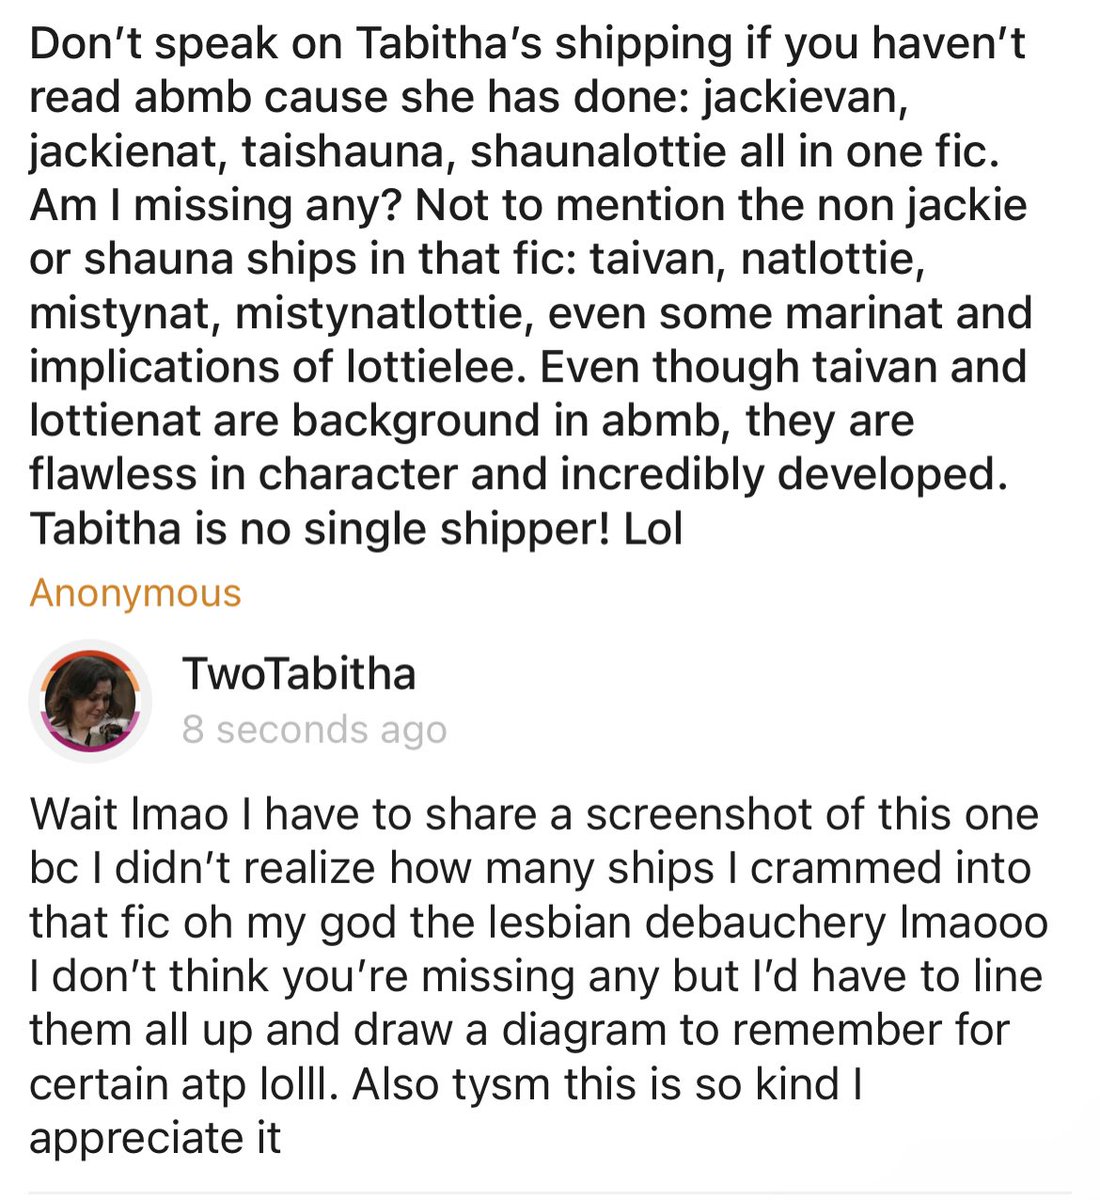 Don’t speak on Tabitha’s shipping if you haven’t read abmb cause she has done: jackievan, jackienat, taishauna, s… — Wait lmao I have to share a screenshot of this one bc I didn’t realize how many ships I crammed into that fic oh … curiouscat.live/TwoTabitha/pos…